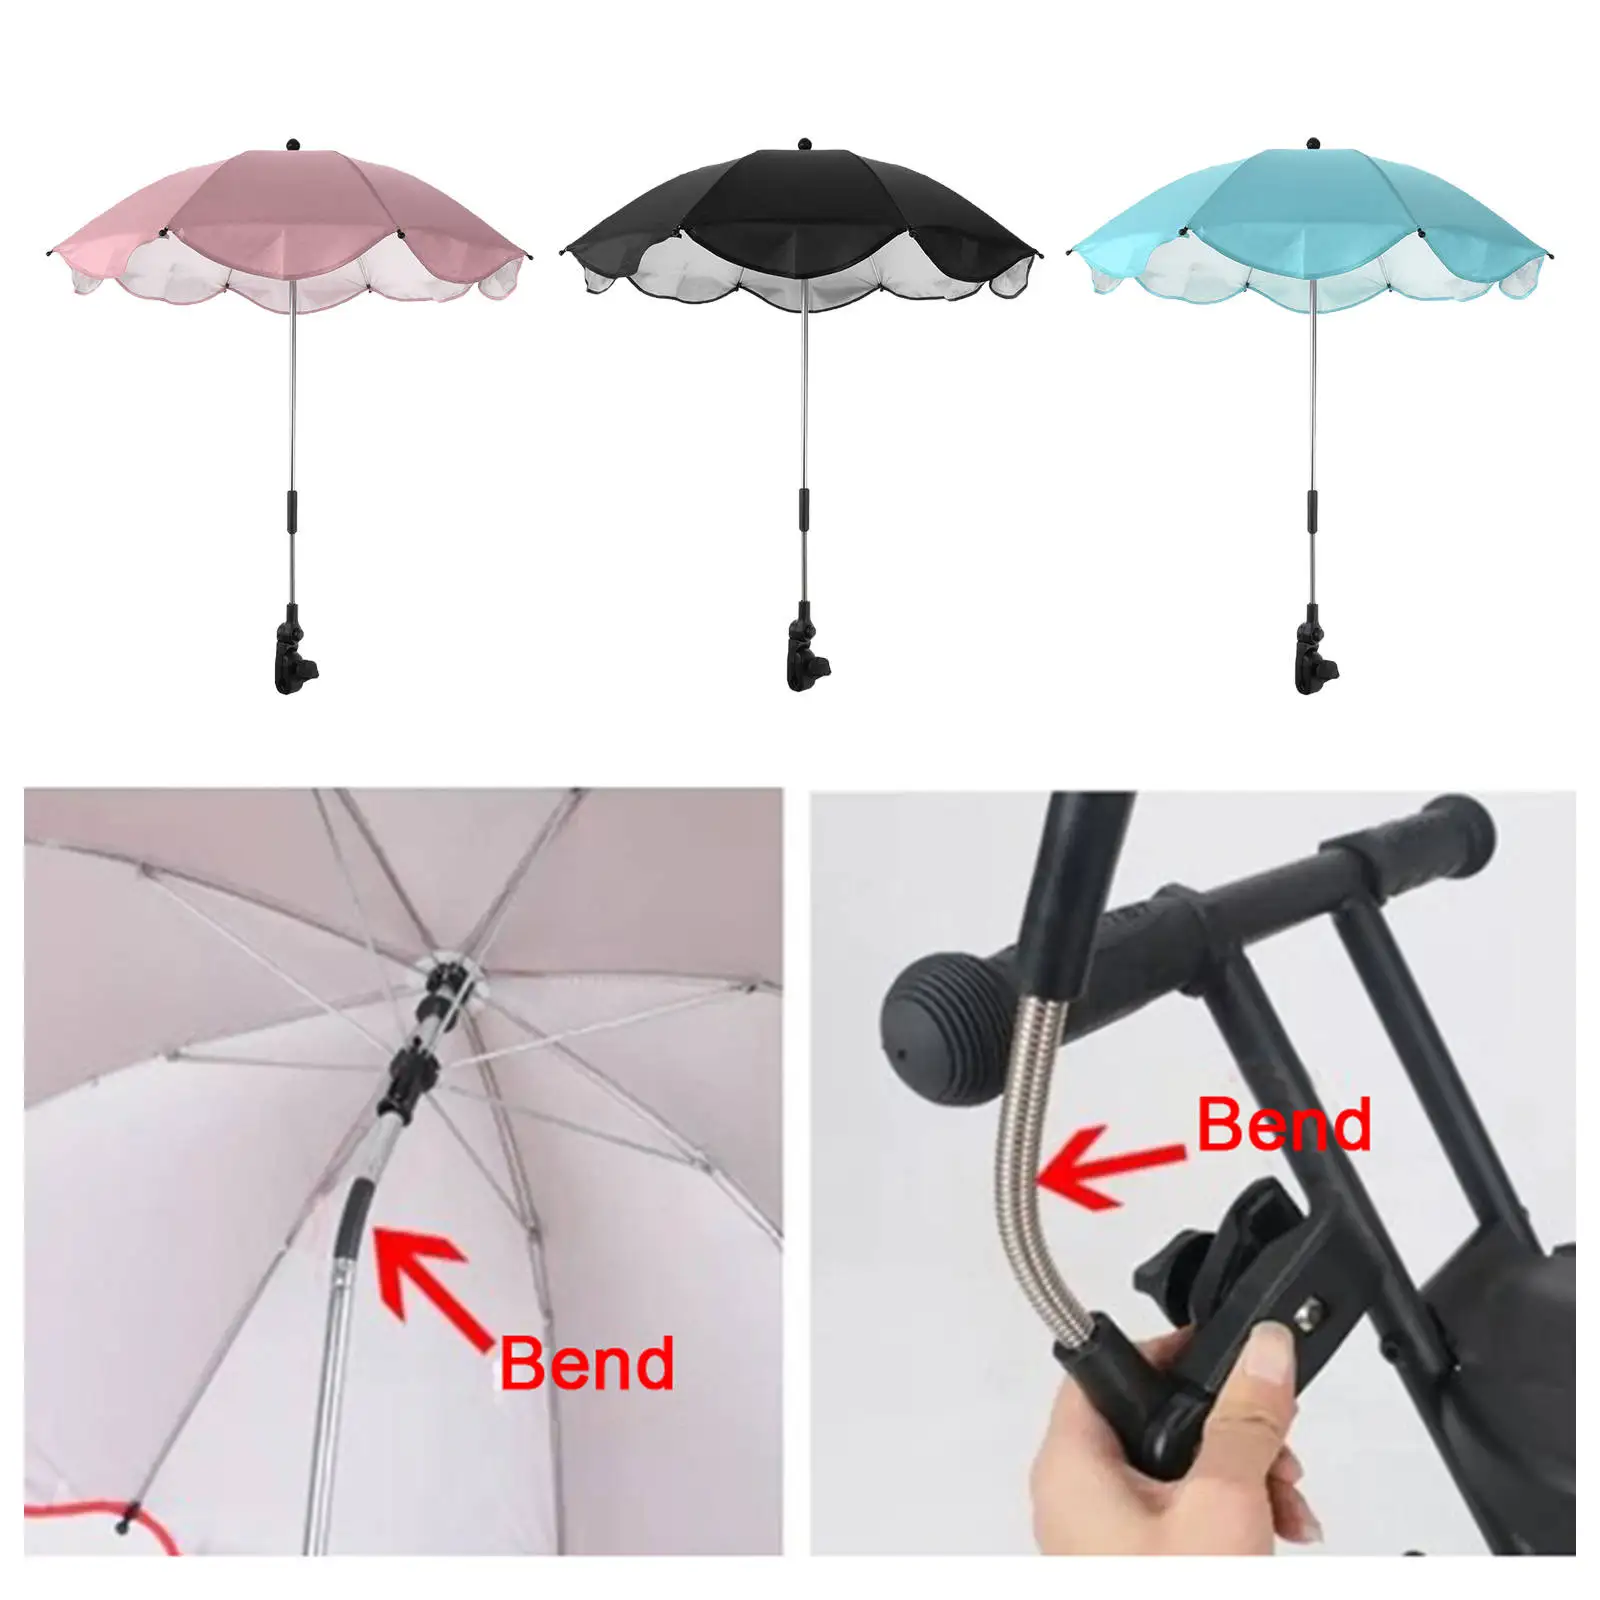 used baby strollers near me Adjustable Baby Stroller Umbrella Clamp-On Shade Folding 360 Degree Rain Flexible Sunshade Canopies for Pram Buggy Pushchair baby trend jogging stroller accessories